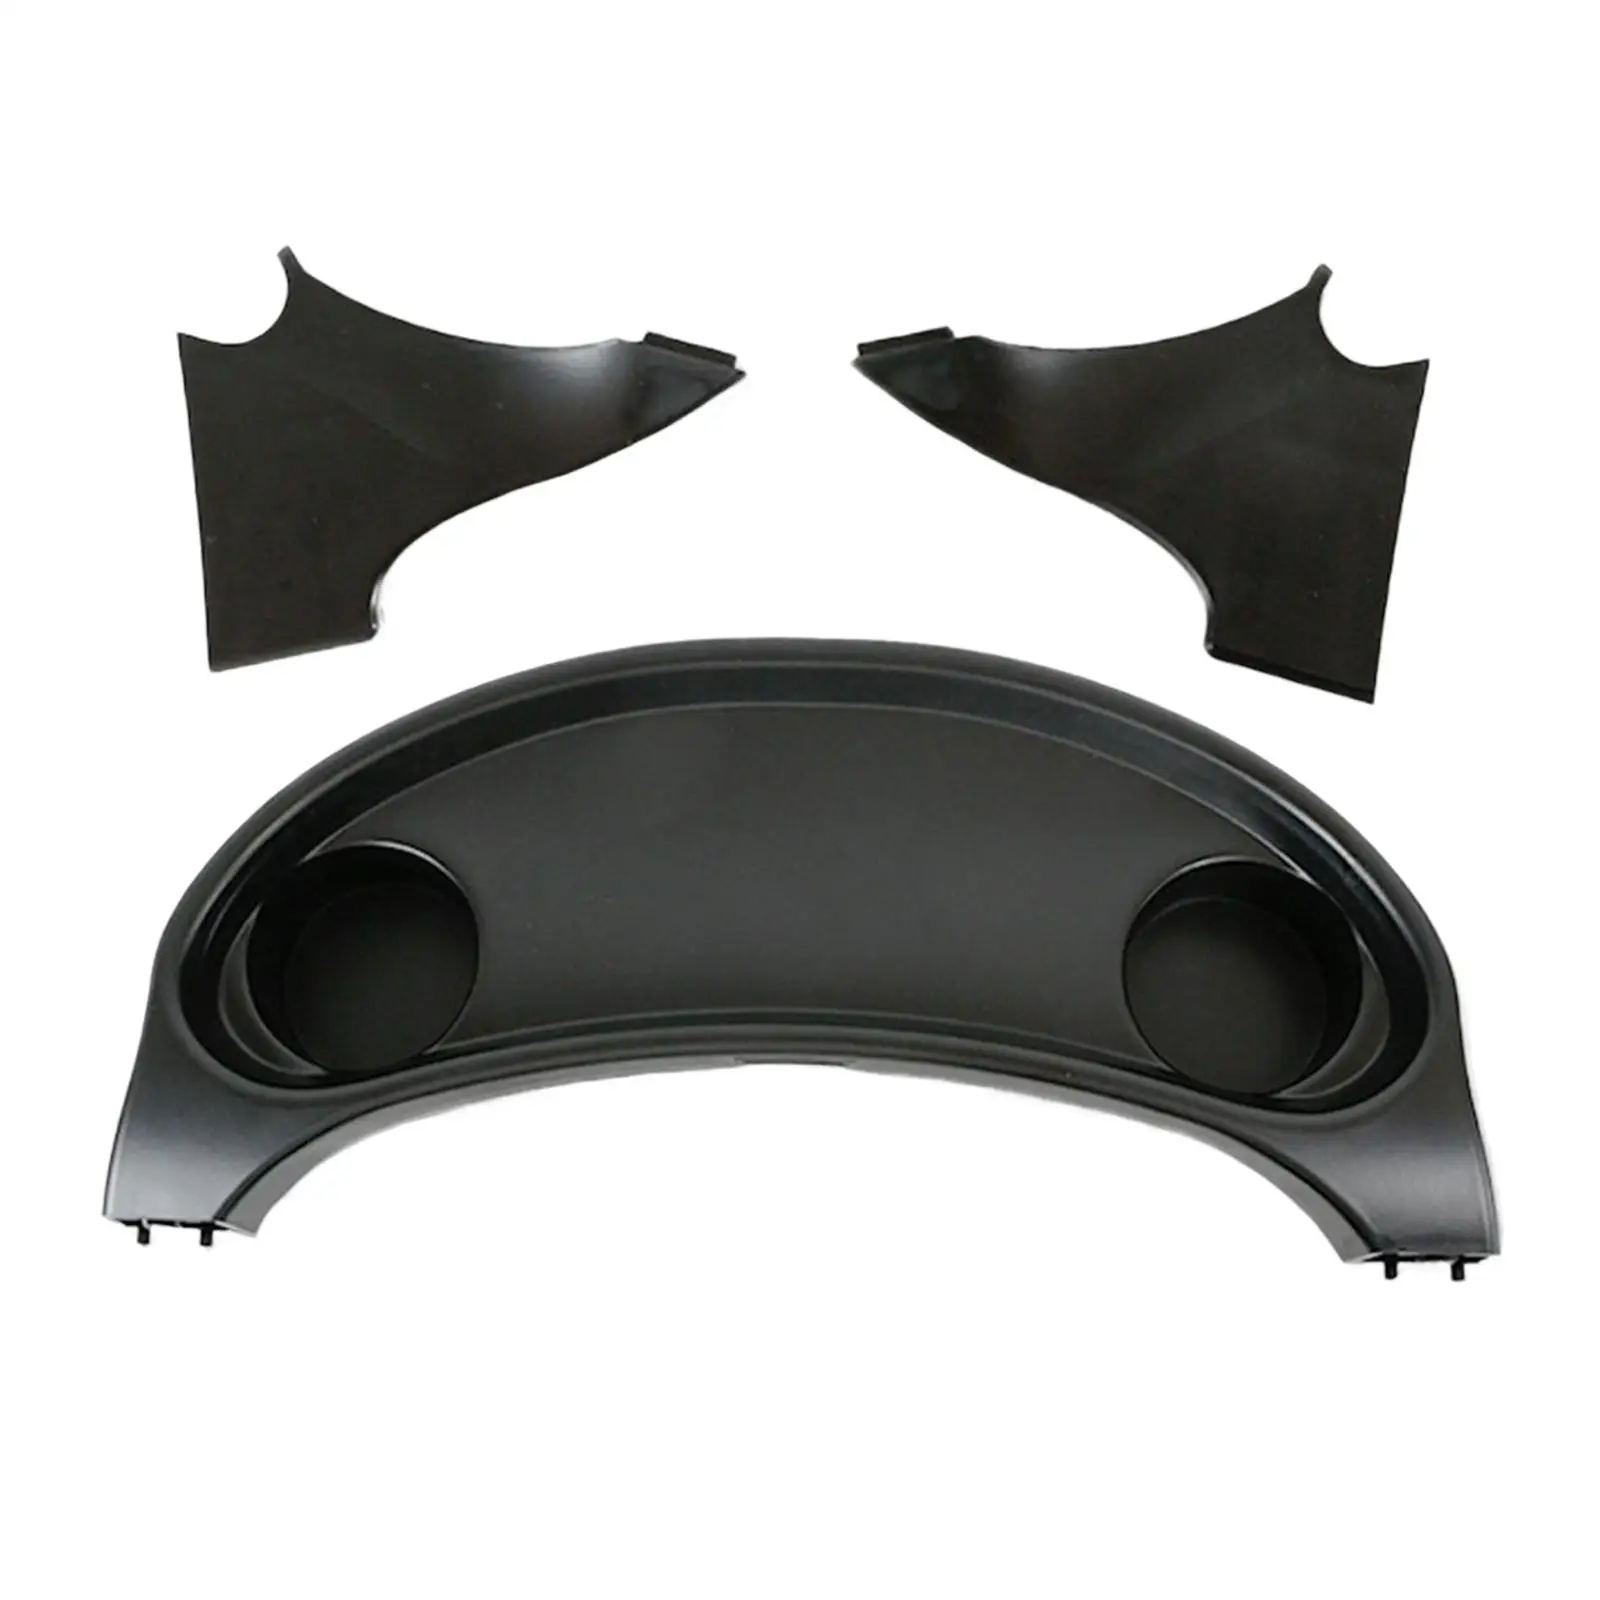 

Stroller Tray Washable Easy to Install Stable Fixation Grip Accessories Black Organizer Removable Child Tray for Yoyo+